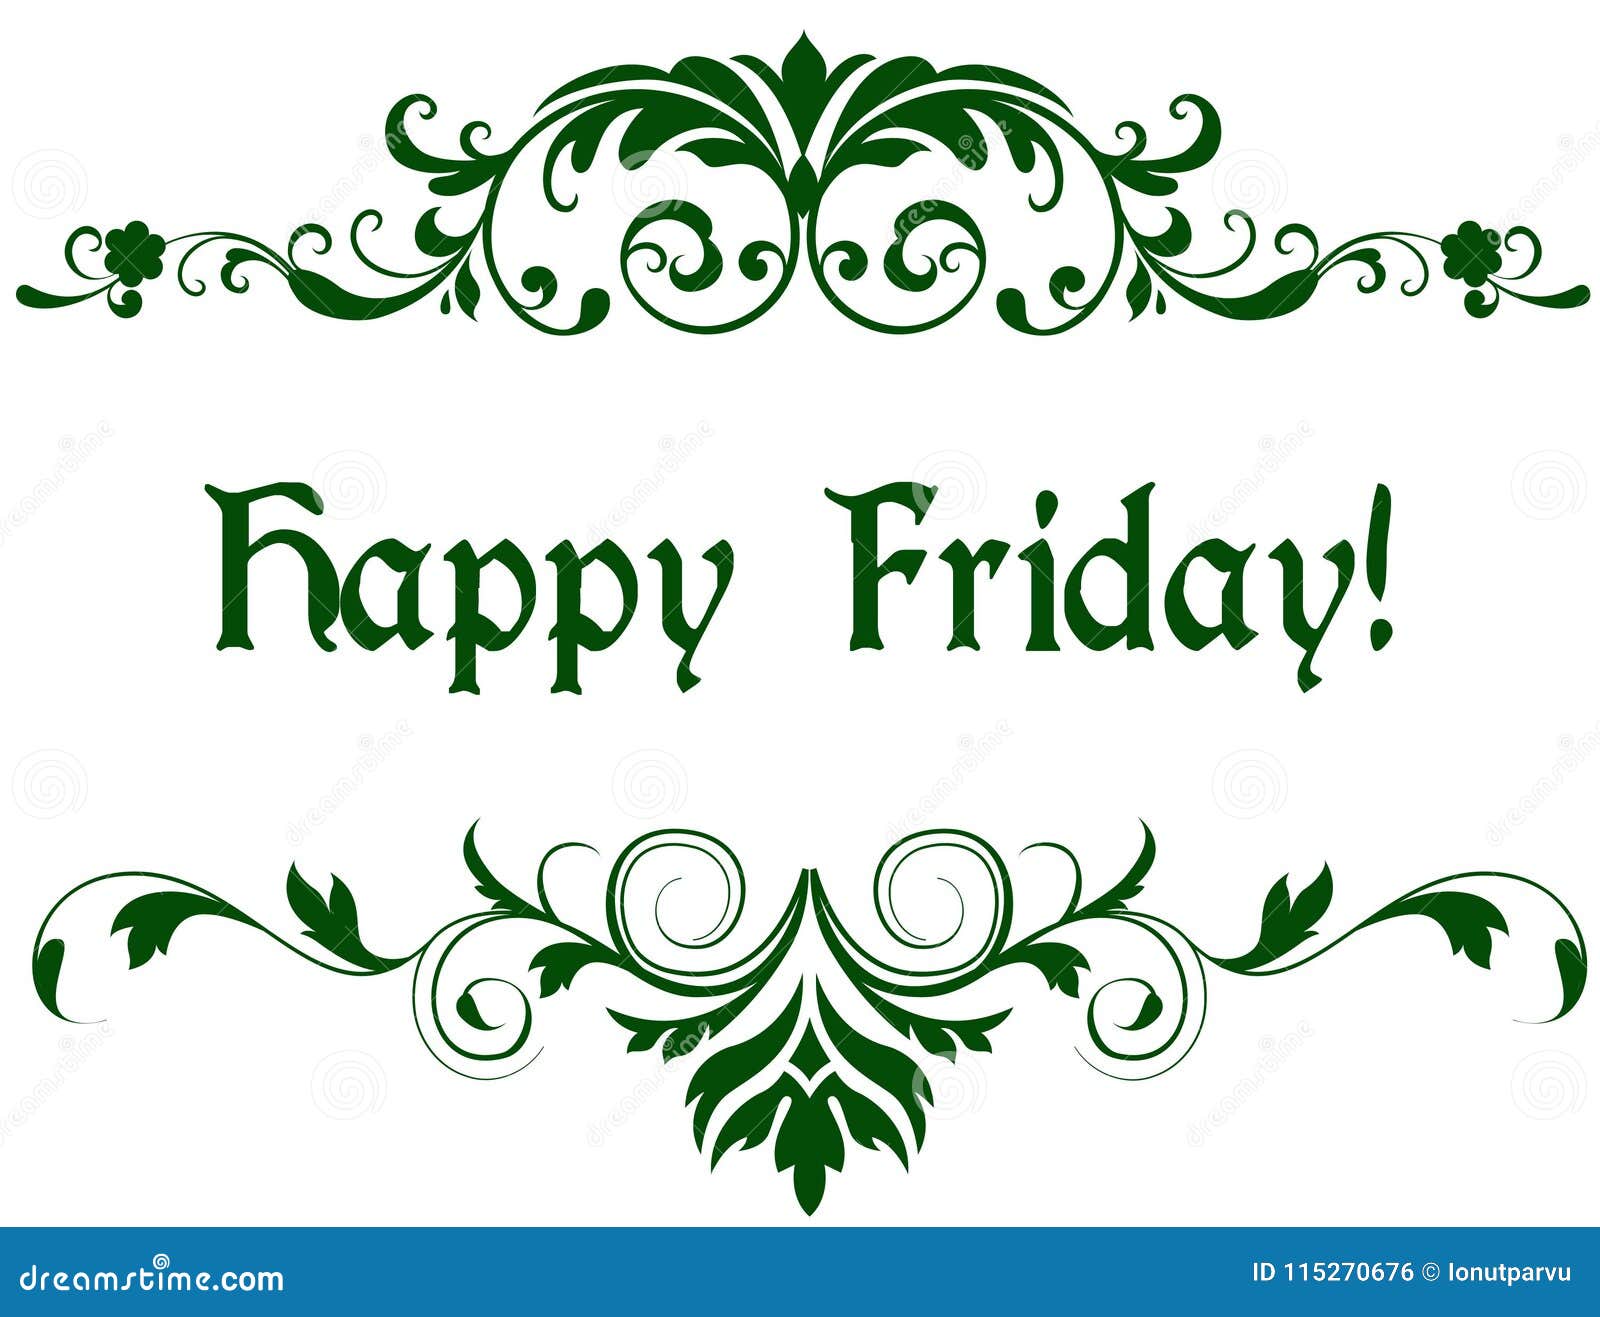 Green Frame with HAPPY FRIDAY Text. Stock Illustration ...